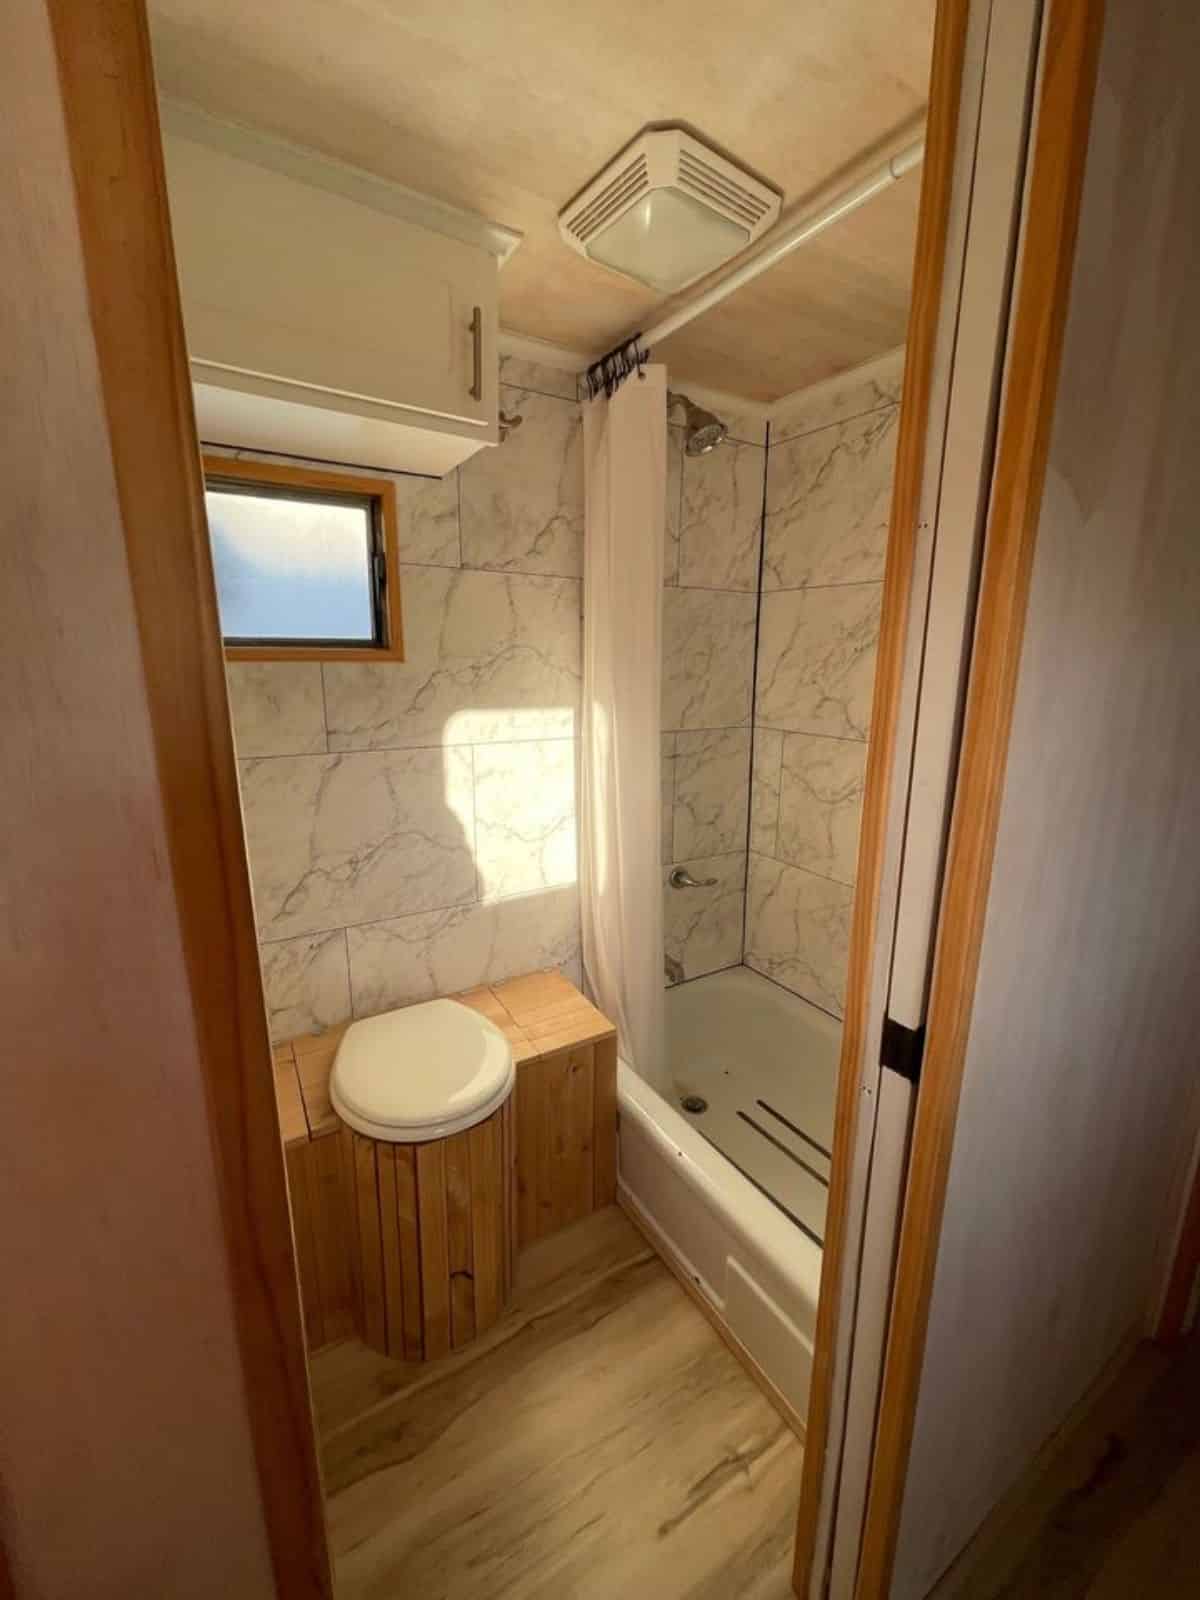 stunning bathroom of vintage tiny home has all the standard fittings